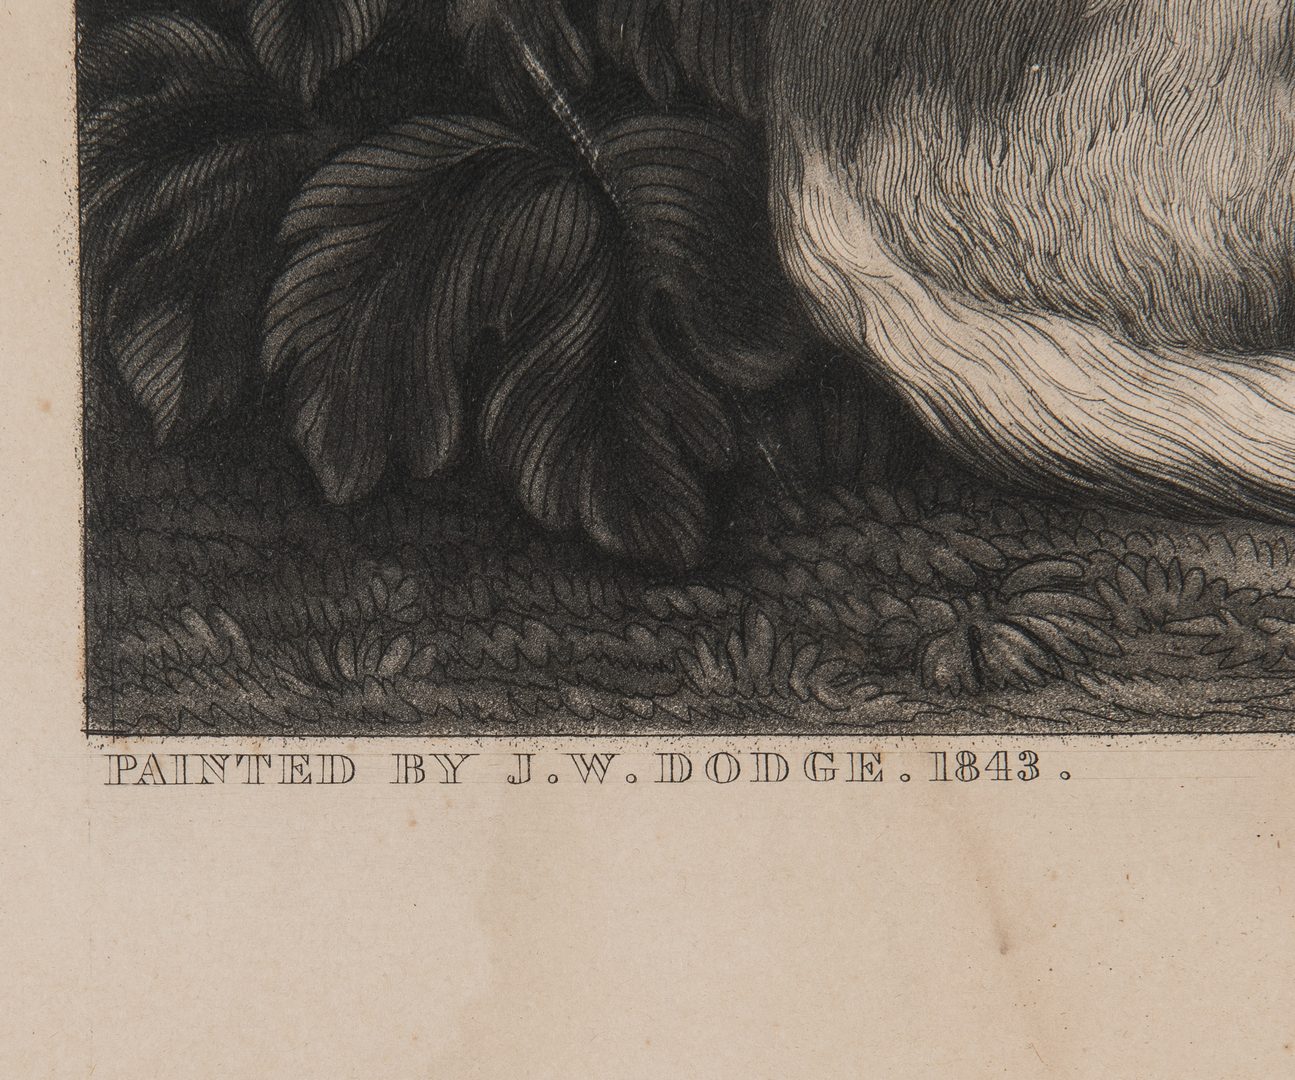 Lot 258: Henry Clay print after John Wood Dodge